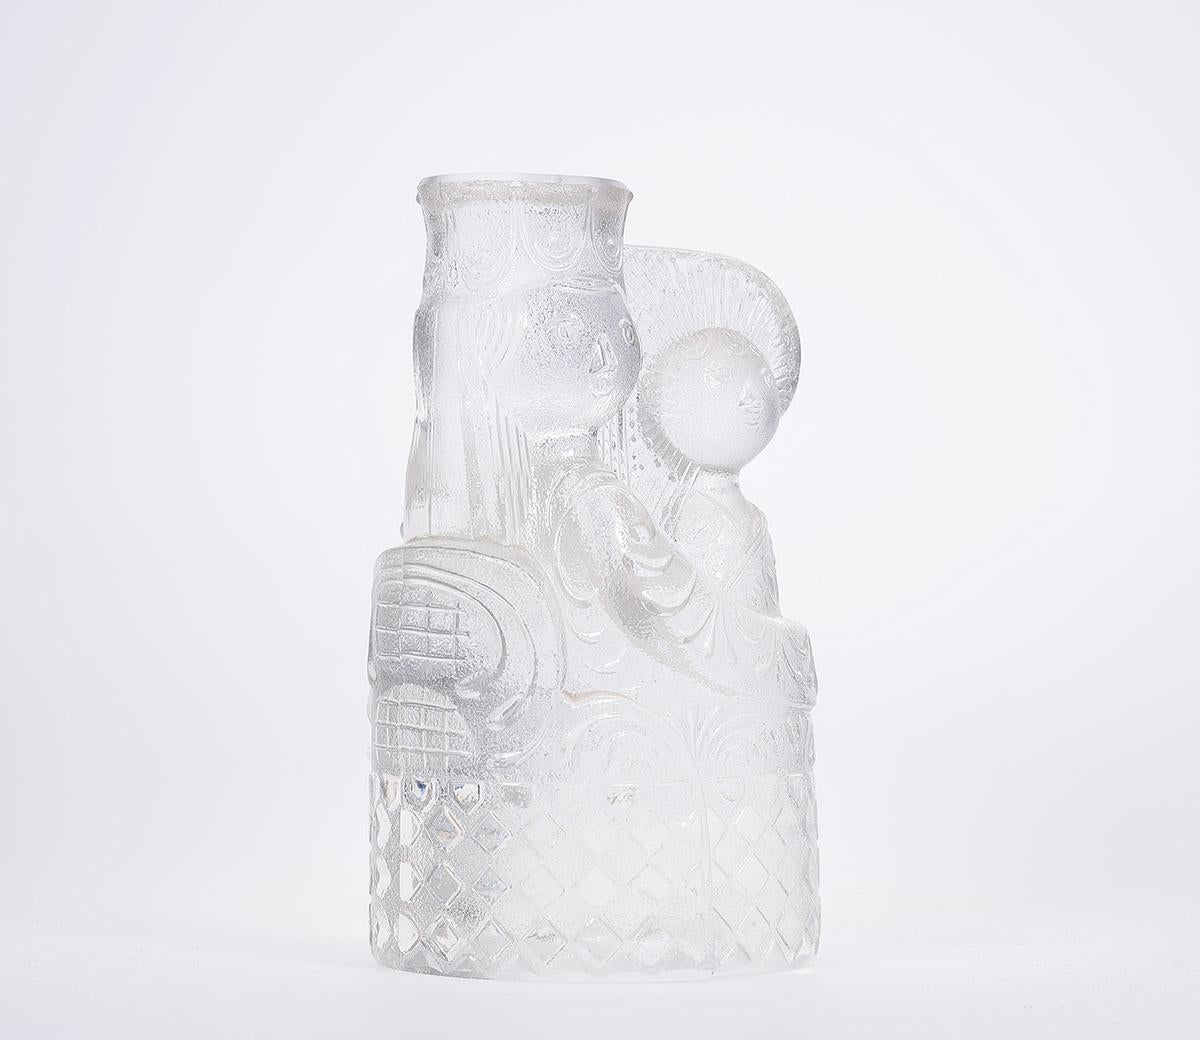 Crystal statuette from Rosenthal Studio linie germany

Designed by the Danish artist Bjorn Wiinblad in the 1970s.

Beautiful crystal glass statue of Mary with child.

The statue is beautifully detailed.